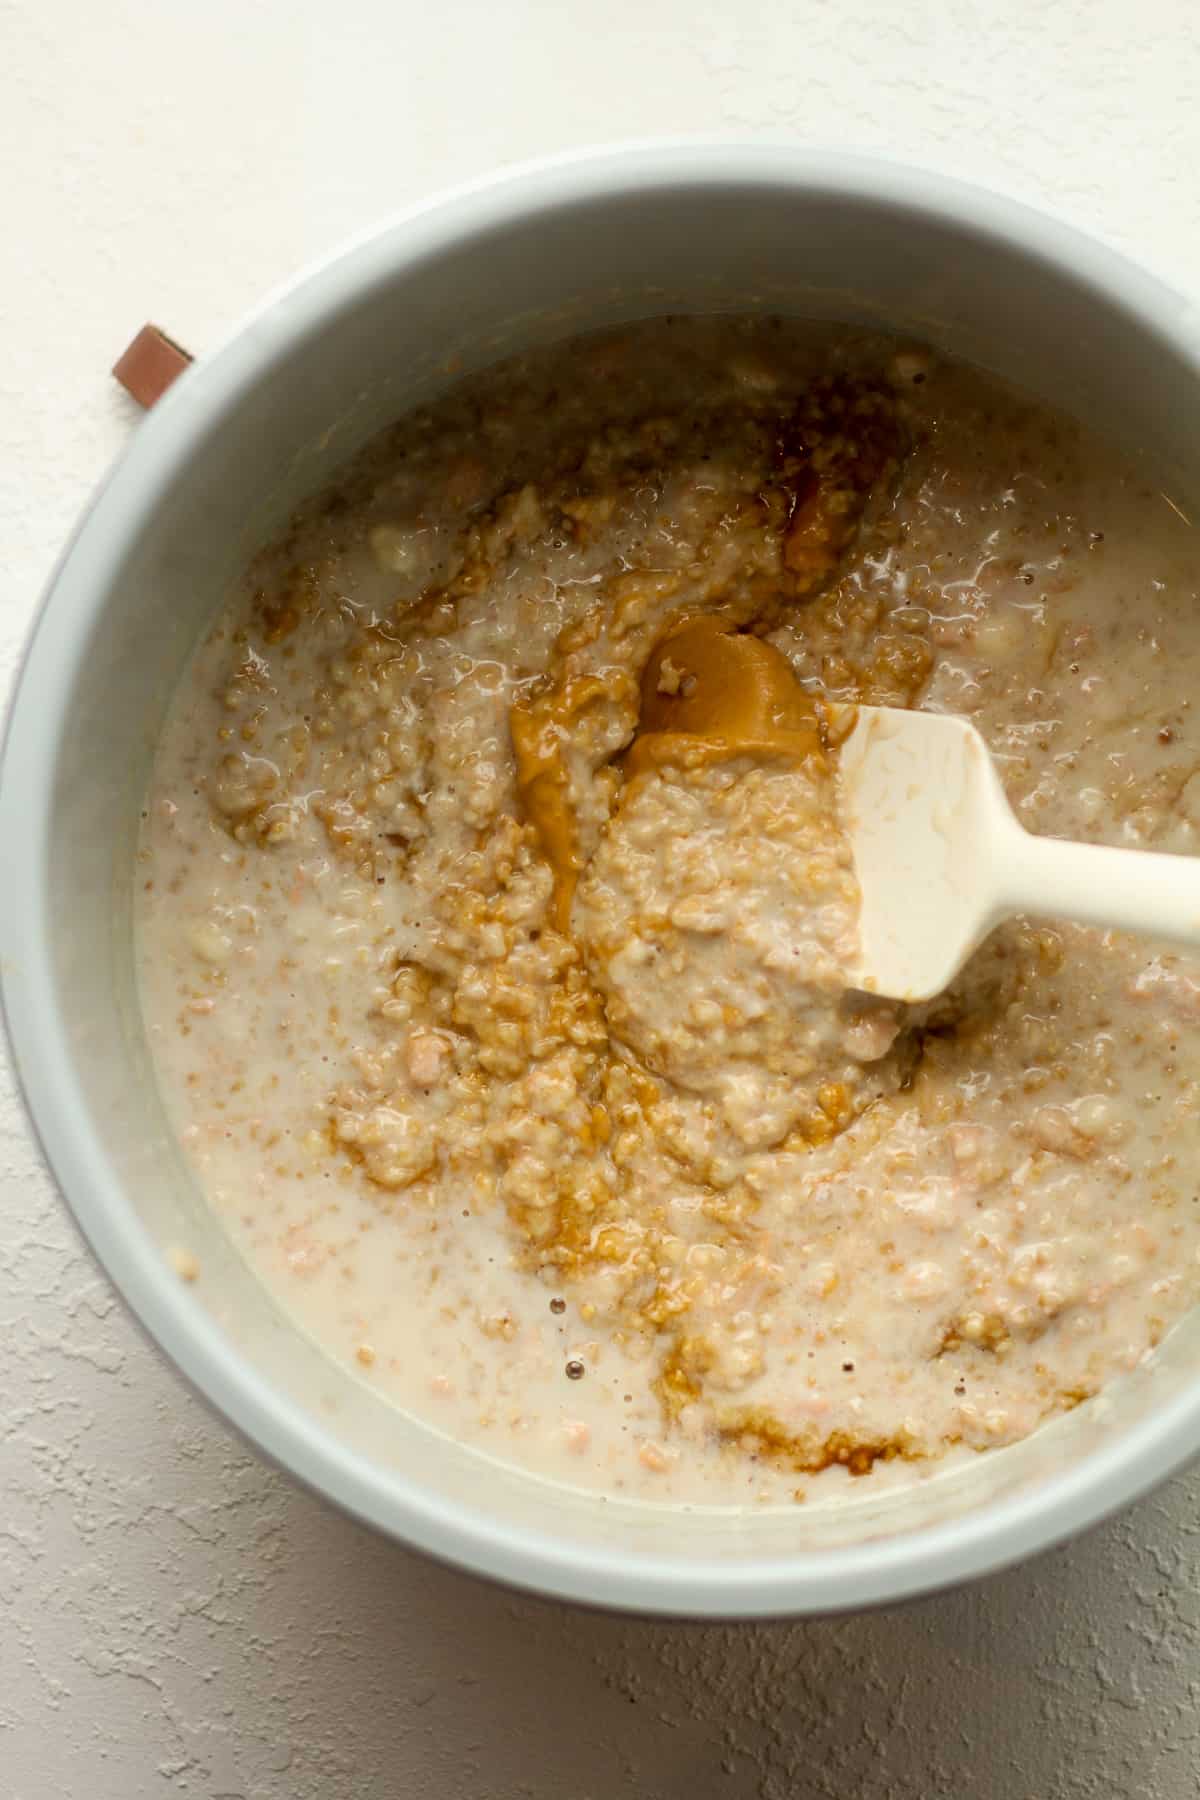 The instant pot steel cut oats with peanut butter swirled in.